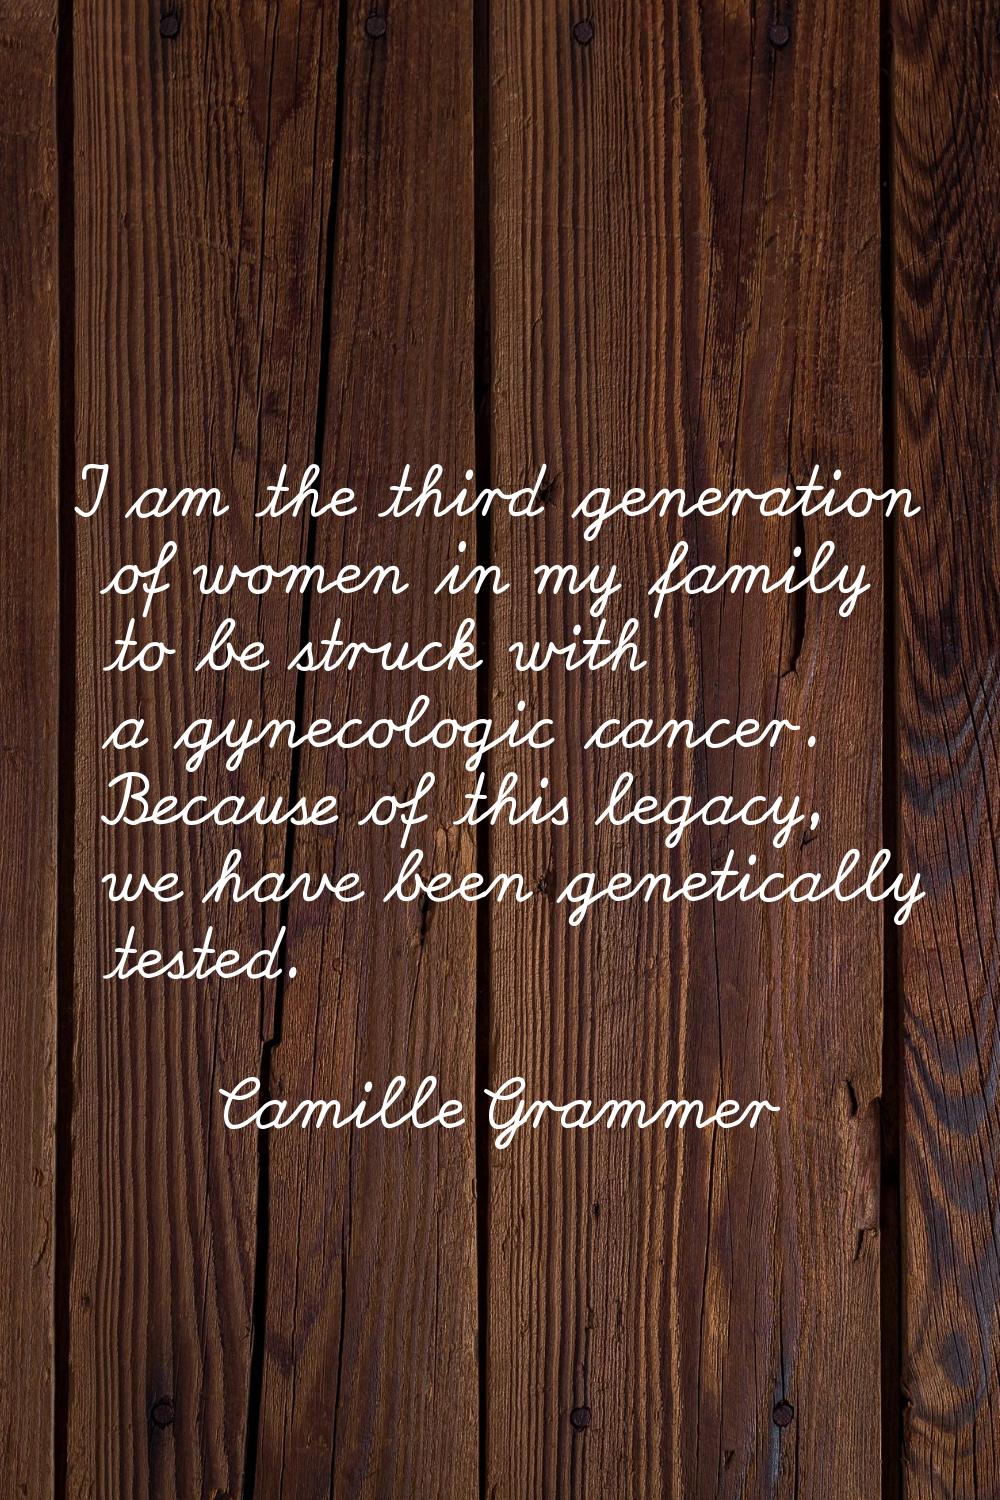 I am the third generation of women in my family to be struck with a gynecologic cancer. Because of 